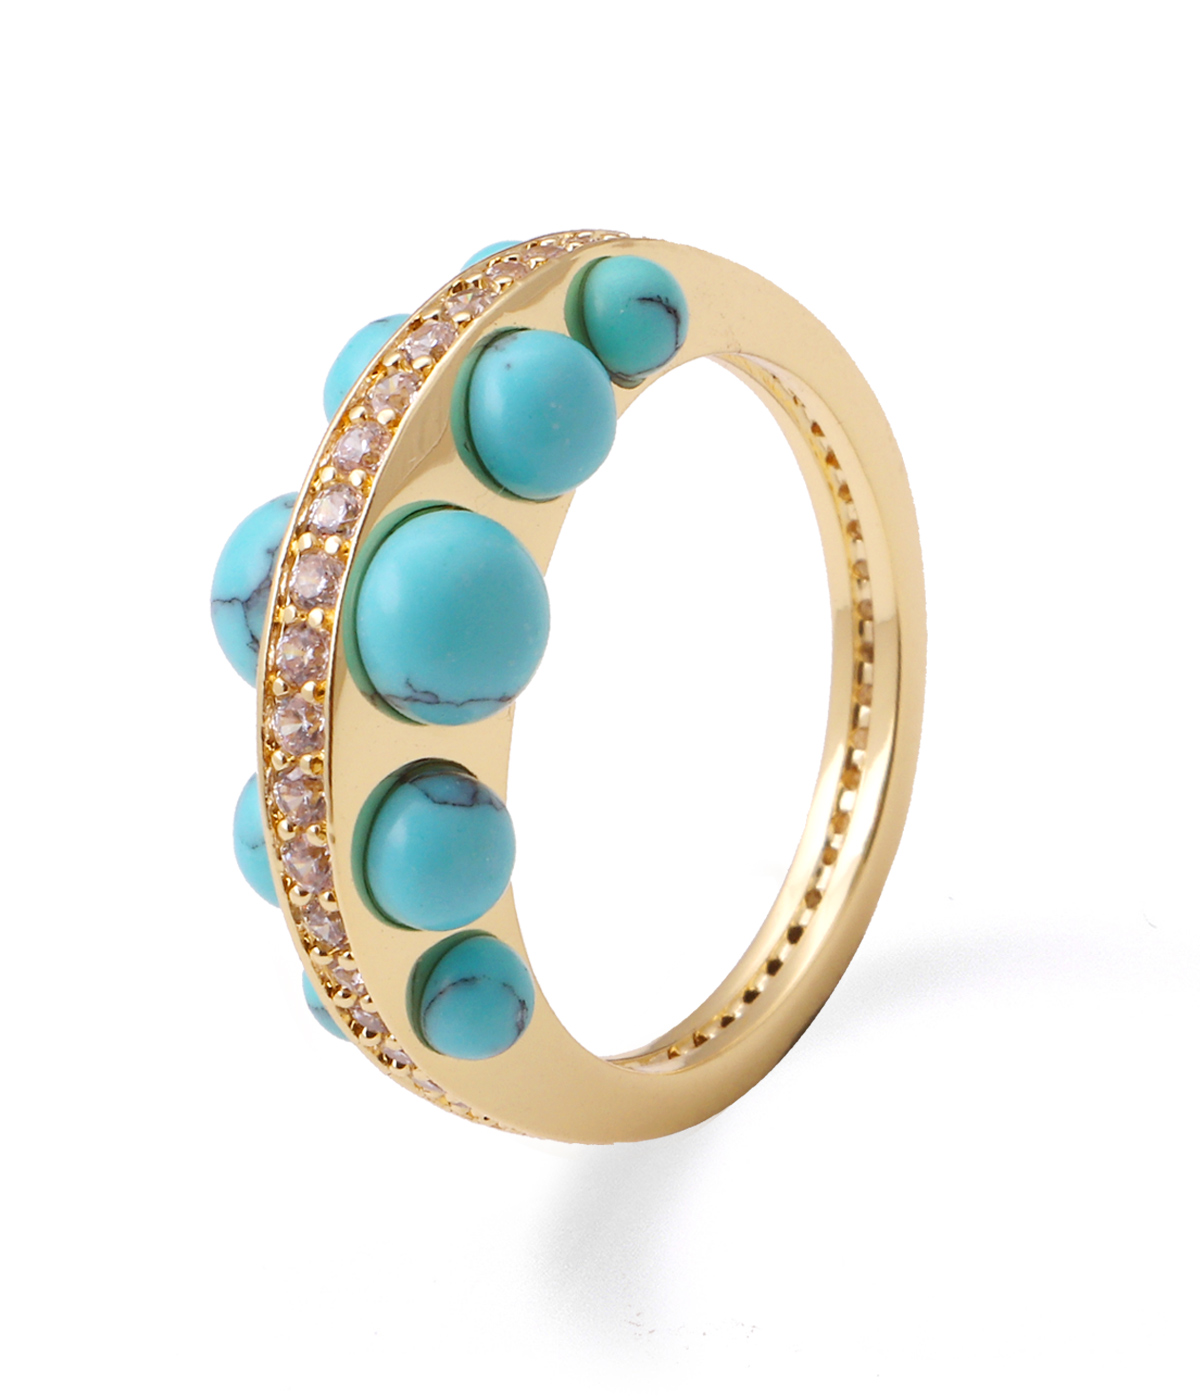 Wonders of the ocean-7（USA）with turquoise -latest RING,Band Ring design 2021